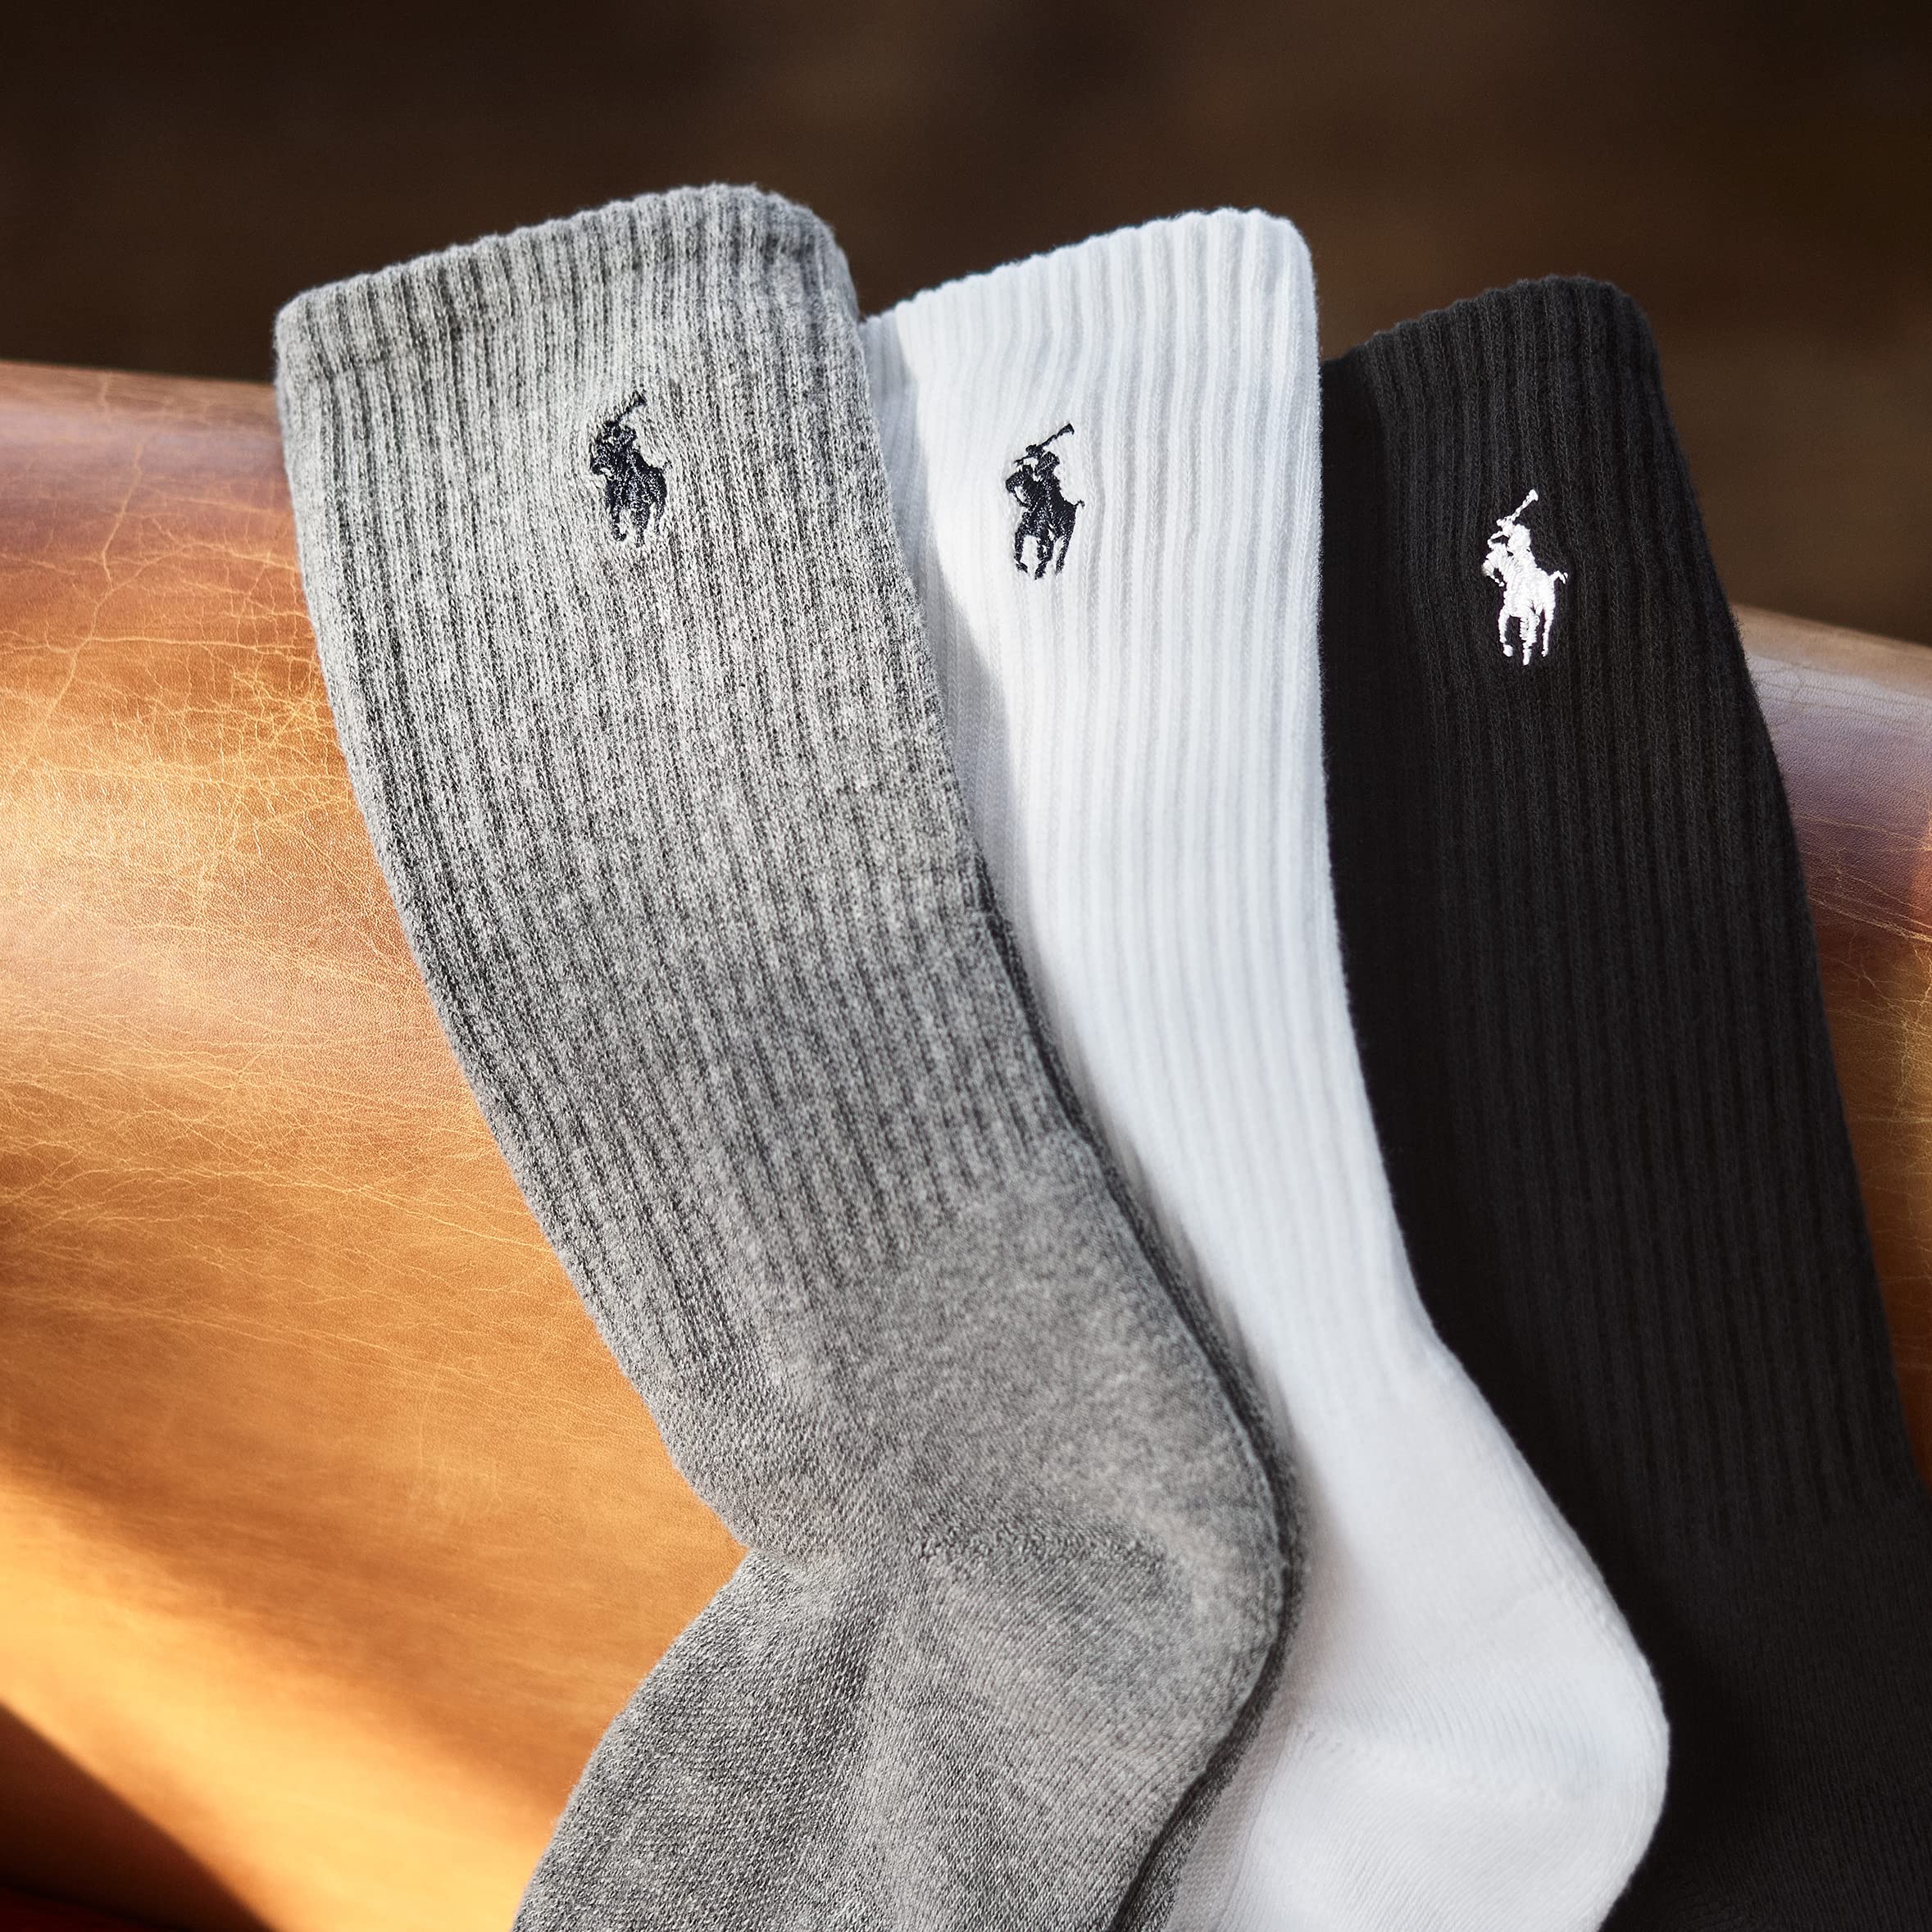 POLO RALPH LAUREN Men's Classic Sport Solid Socks 6 Pair Pack - Cushioned Cotton Comfort, Gray Heather Assorted, 6-12.5